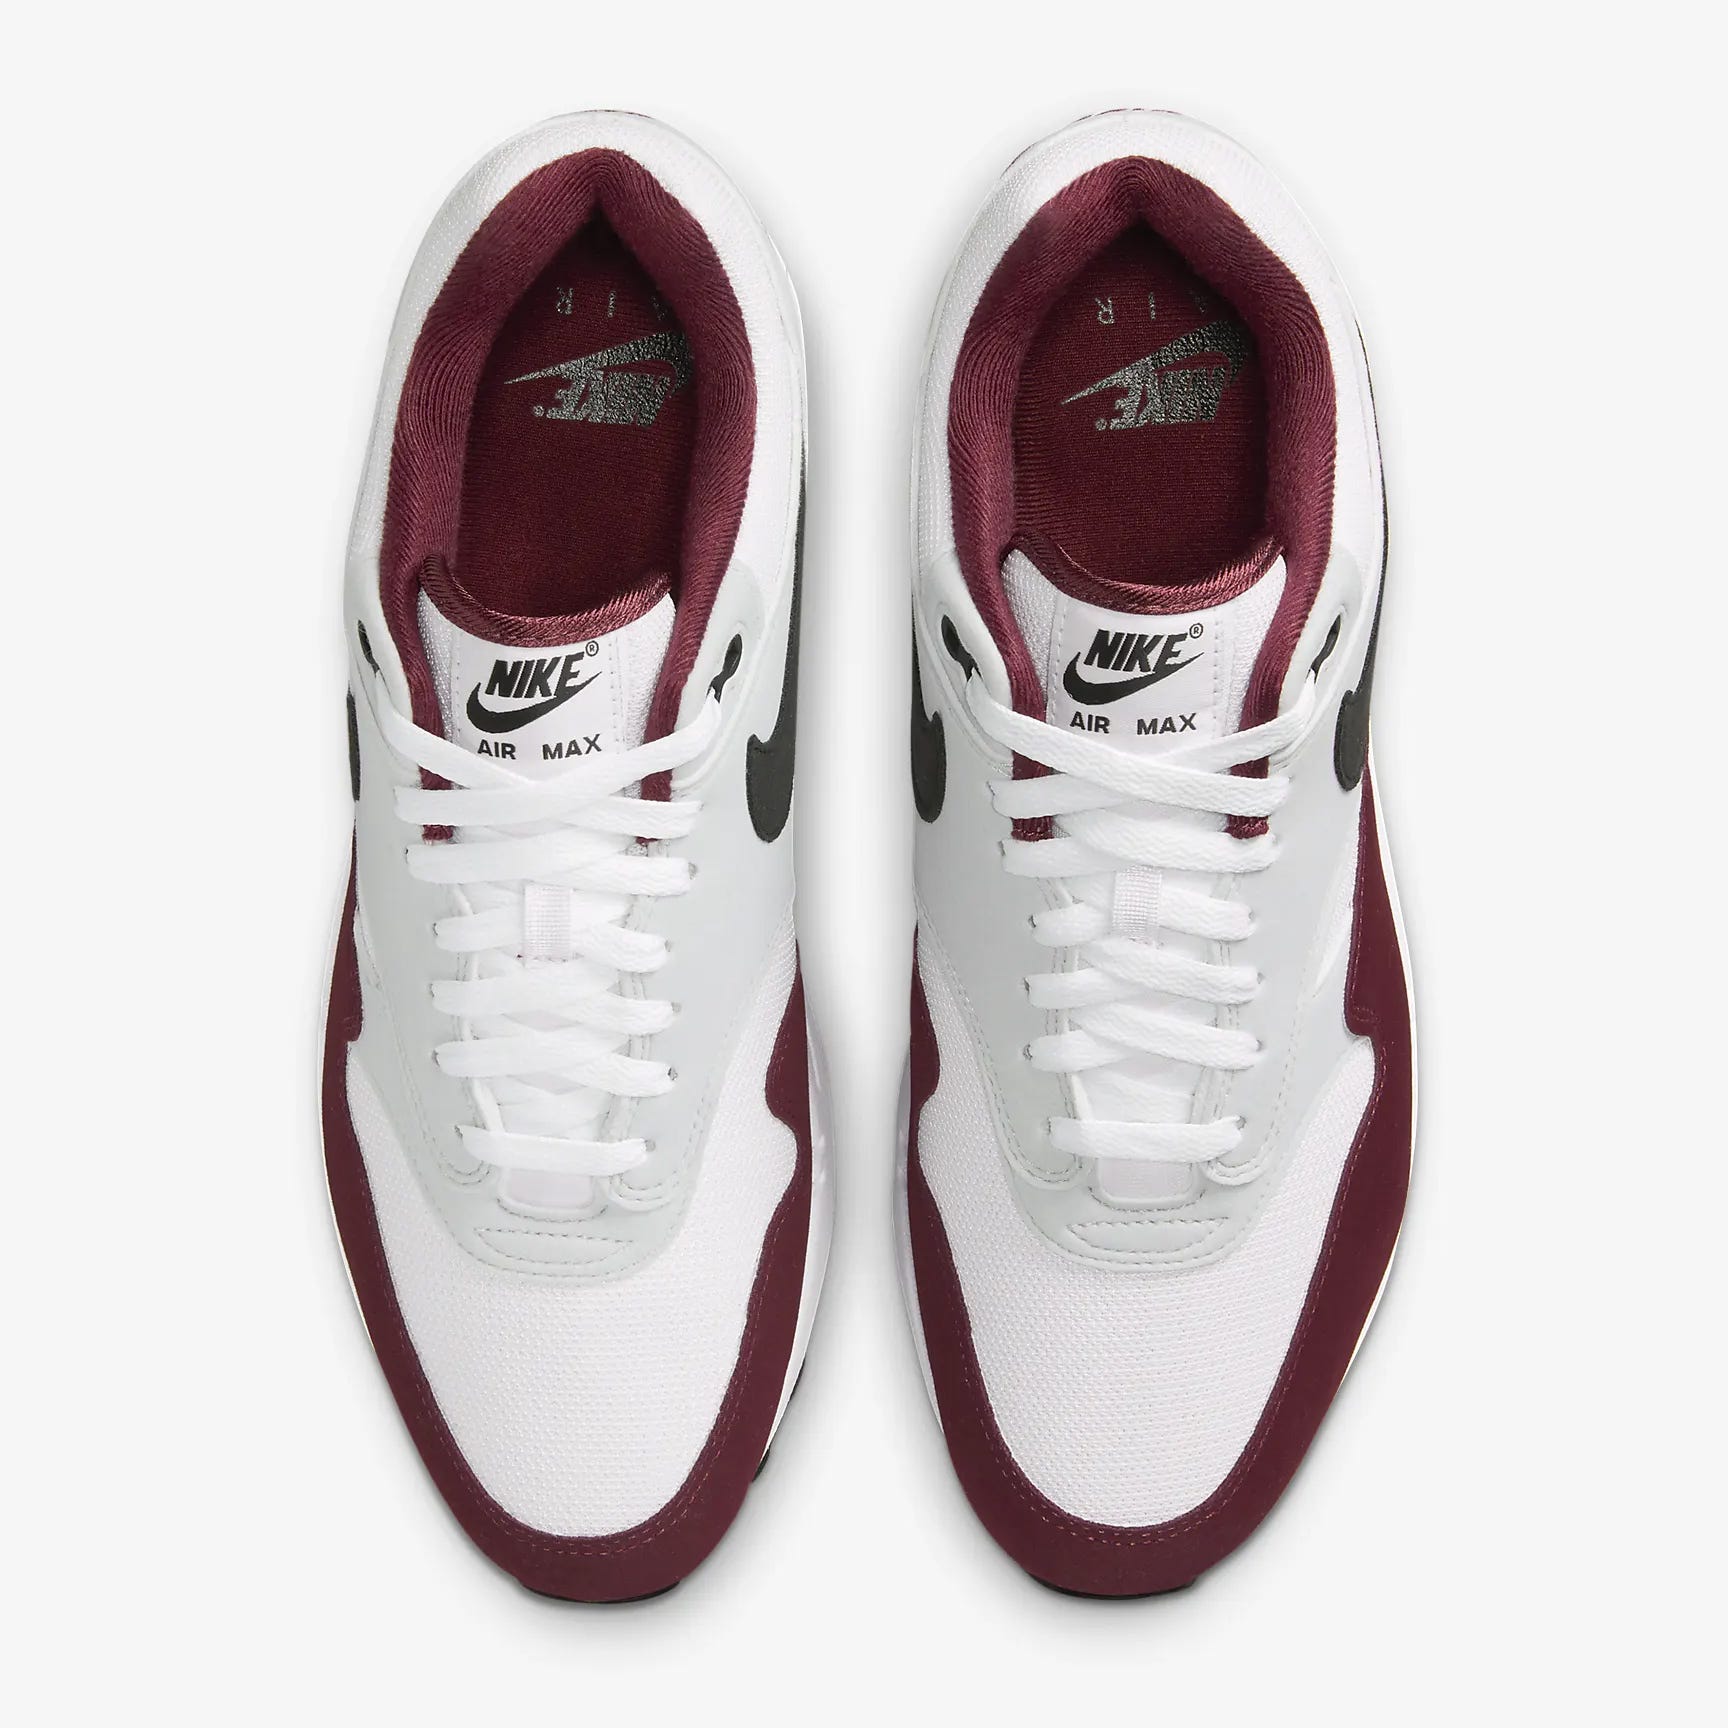 A pair of white and burgundy Nike Air Max sneakers viewed from above.